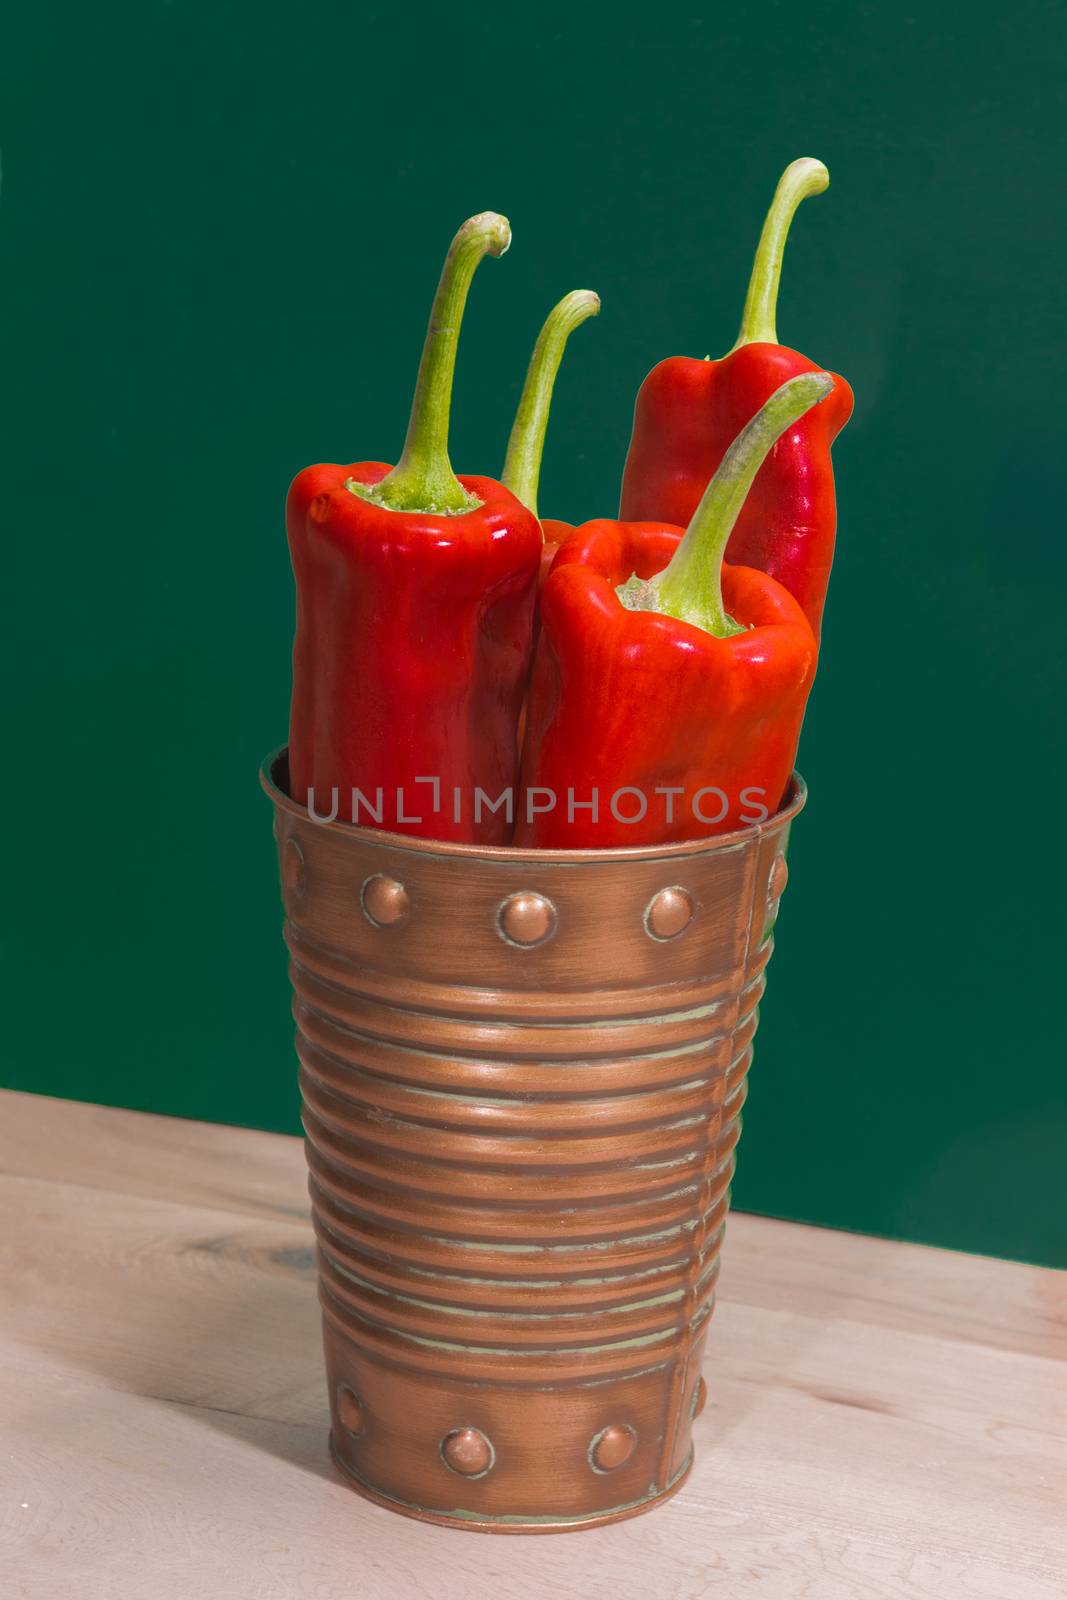 Marconi sweet long pepper in a bucket against a green background